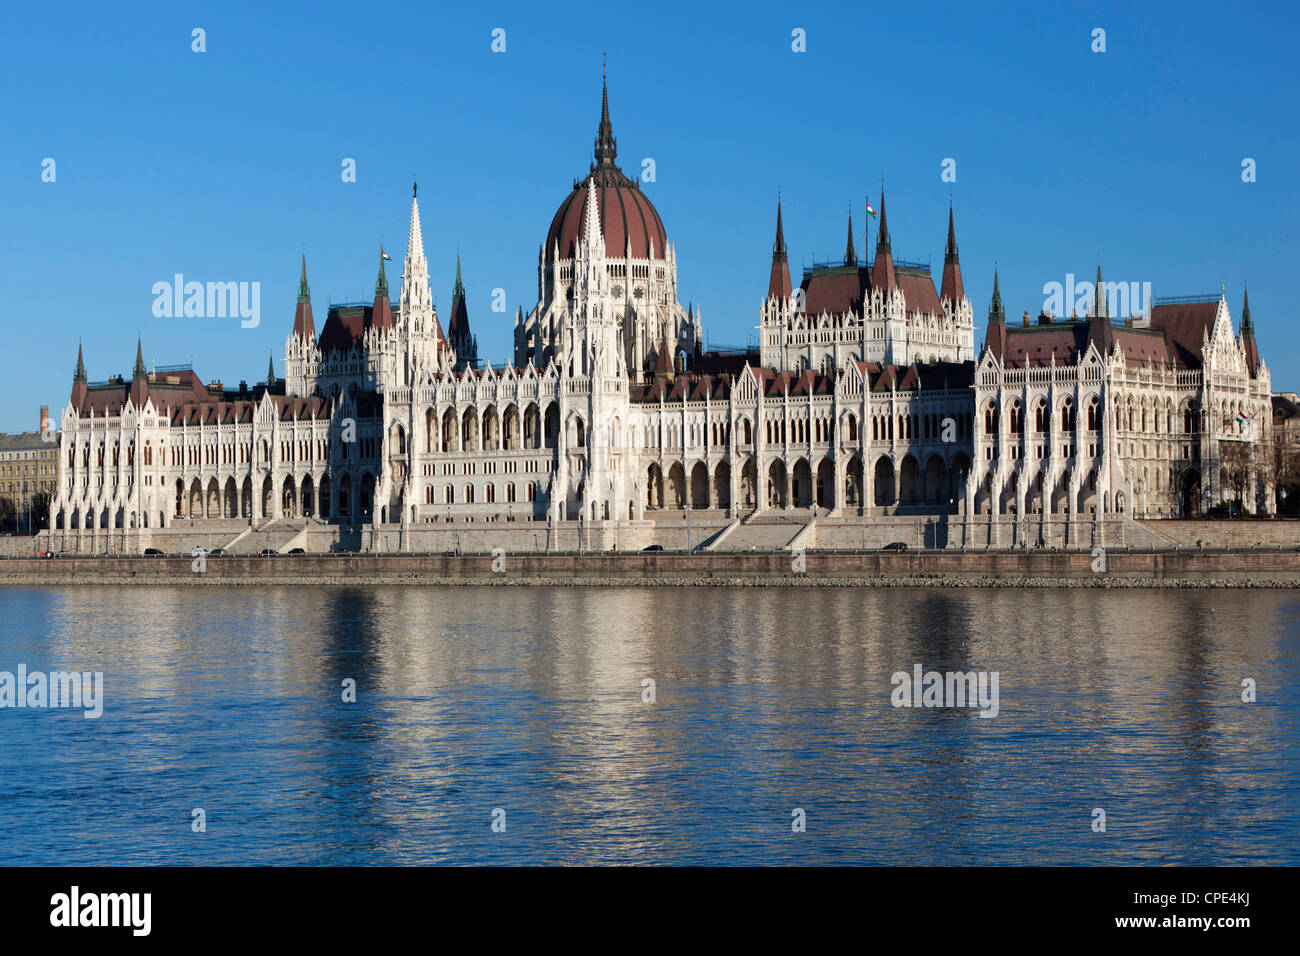 The Parliament (Orszaghaz) across River Danube, UNESCO World Heritage Site, Budapest, Hungary, Europe Stock Photo